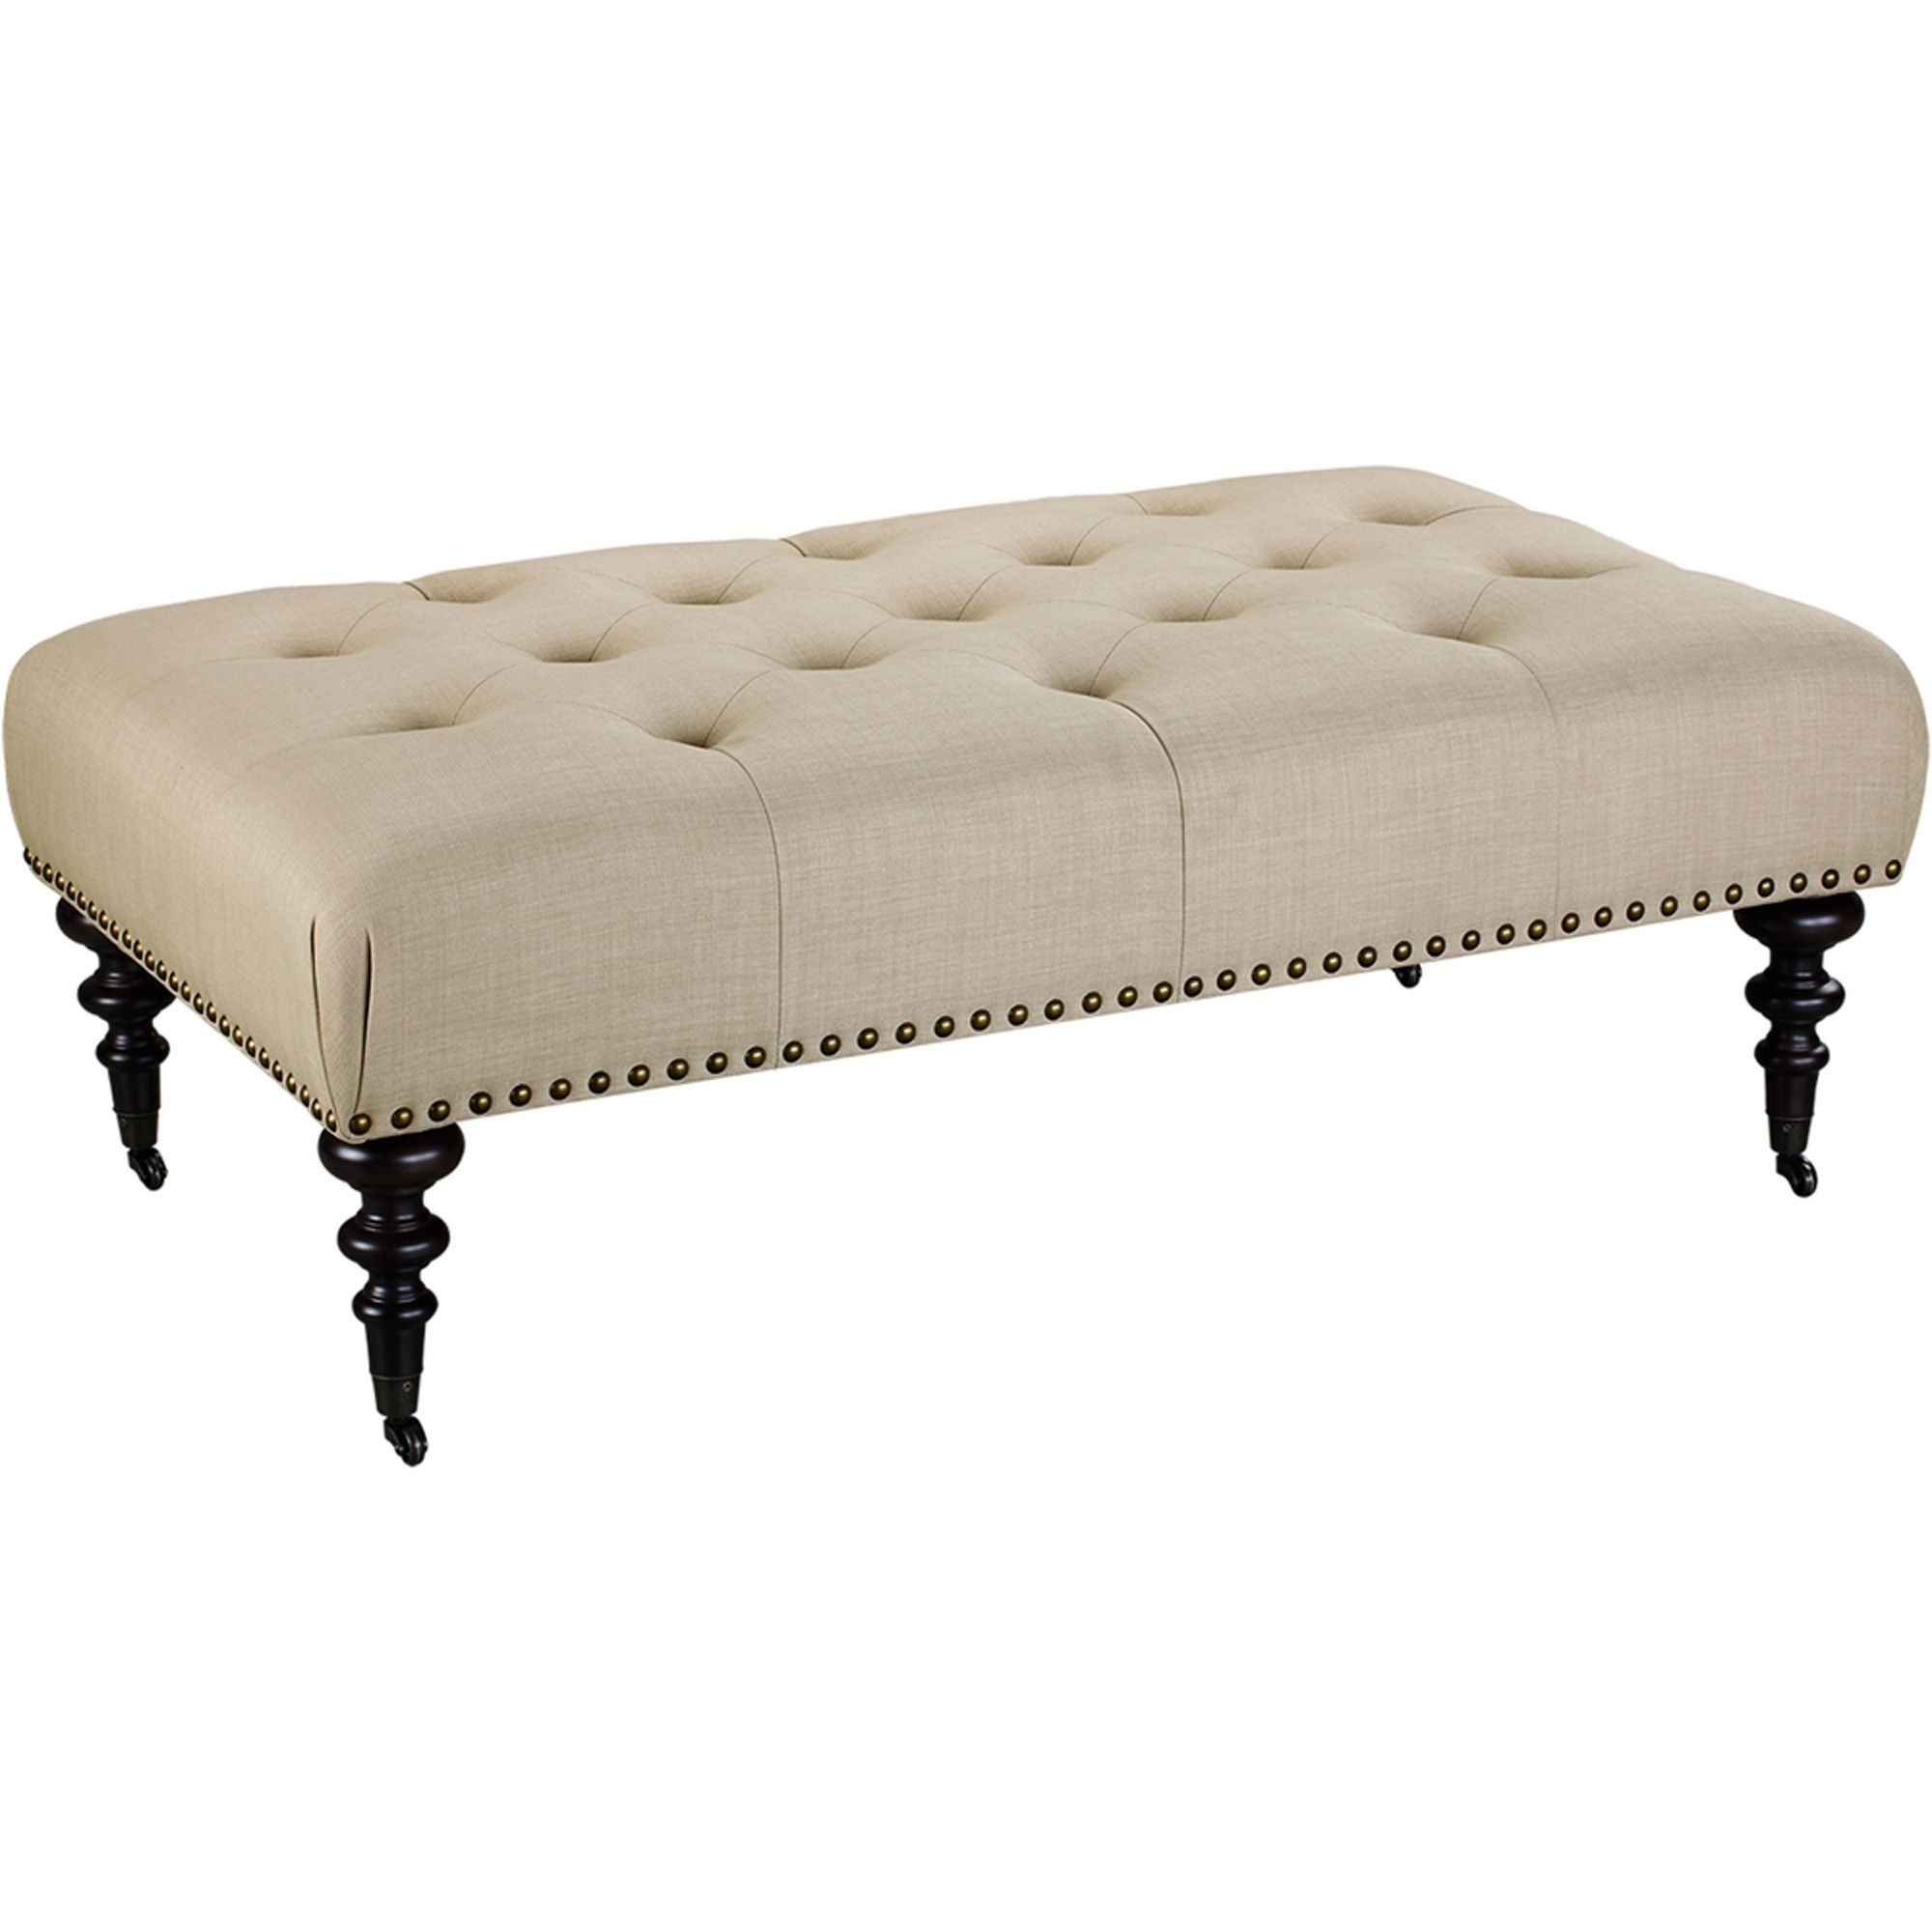 Dorel Living Winston Button Tufted Upholstered Ottoman, Beige In Ottomans With Wheels (Photo 9 of 10)